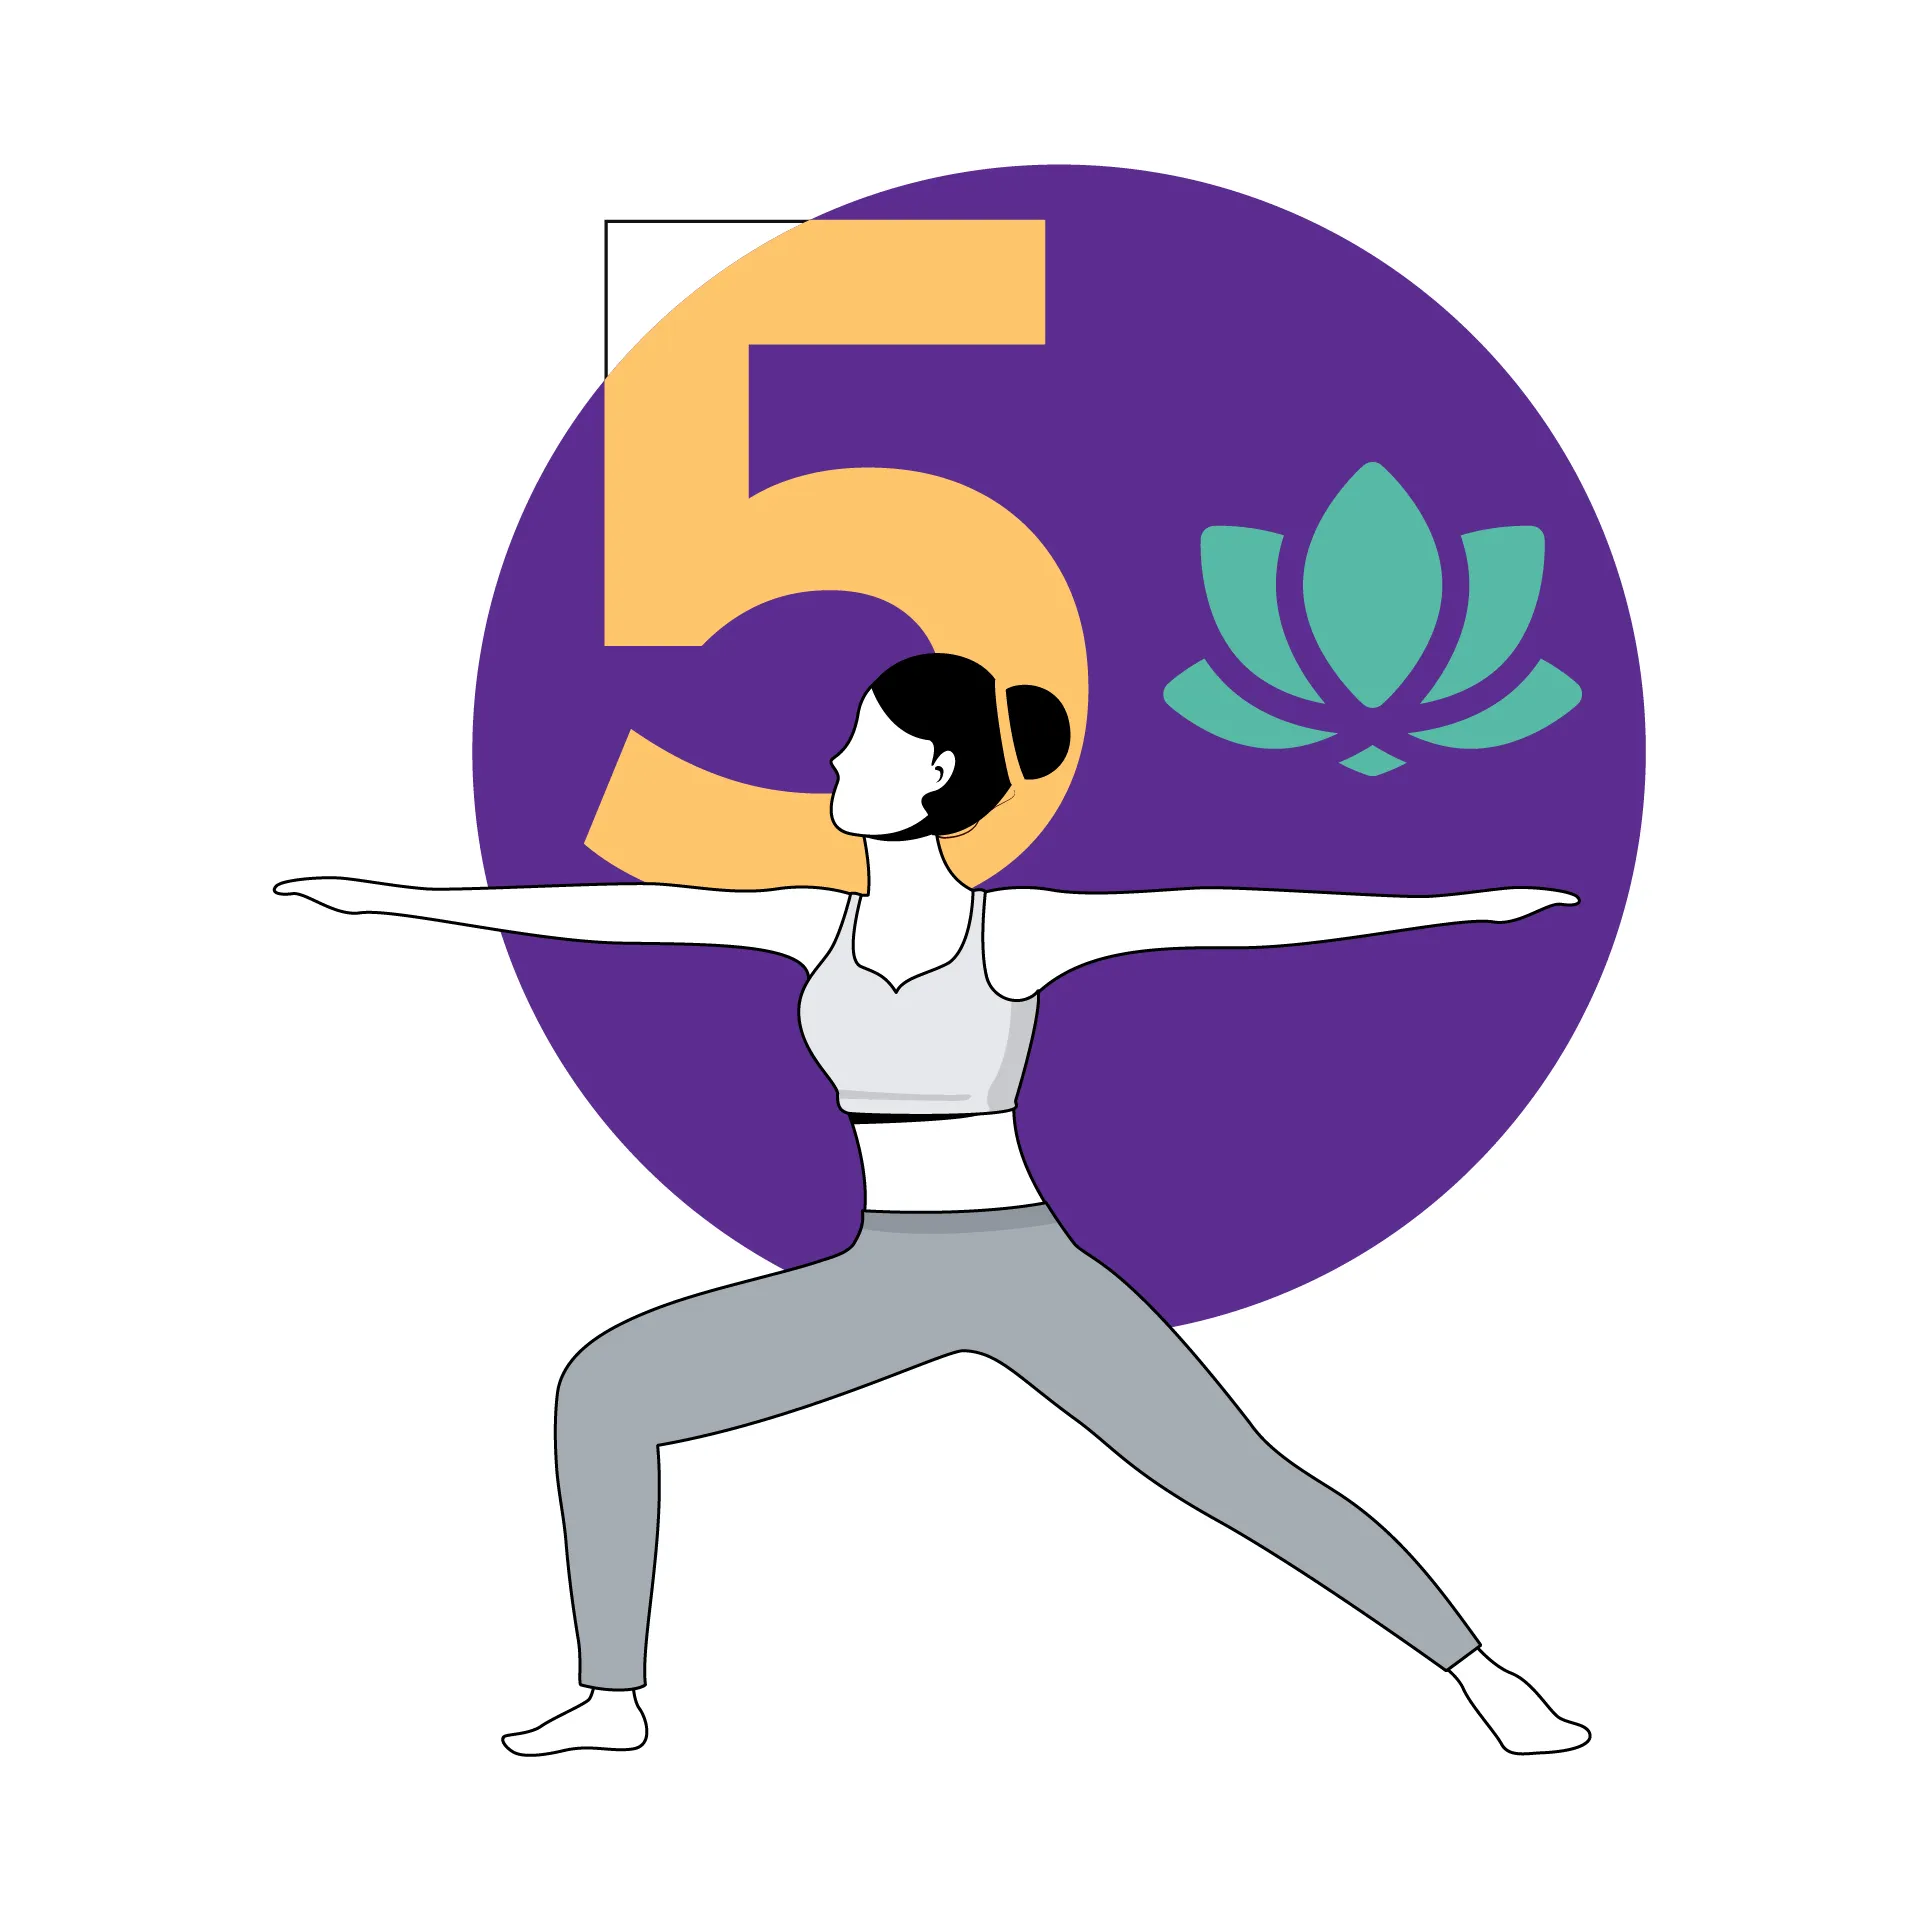 Practice Five Spring Yoga Poses - 10